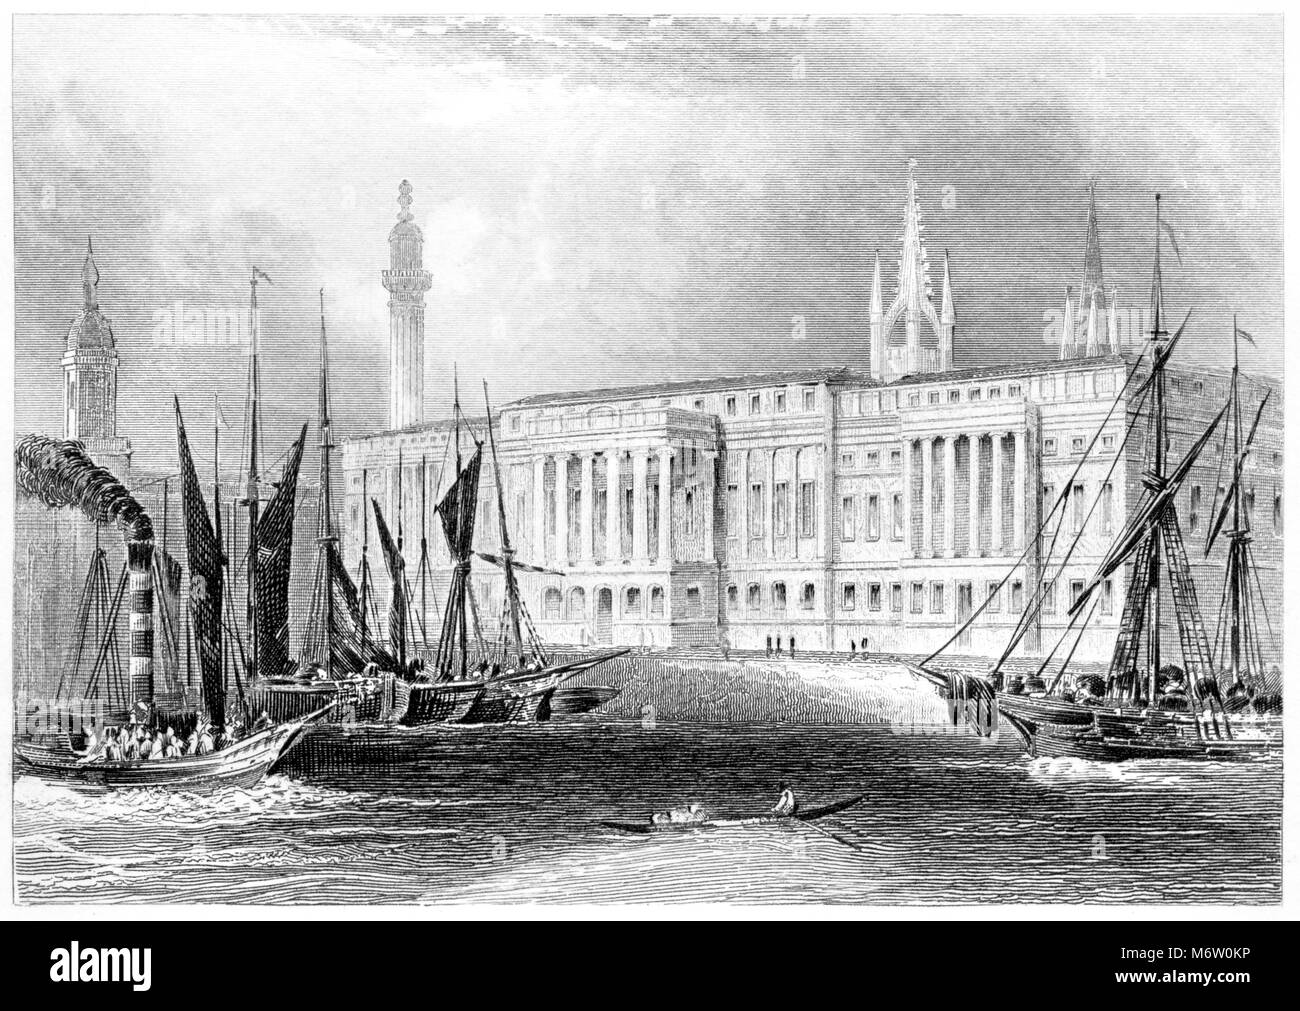 An engraving of The Custom House, London scanned at high resolution from a book printed in 1851.  Believed copyright free. Stock Photo